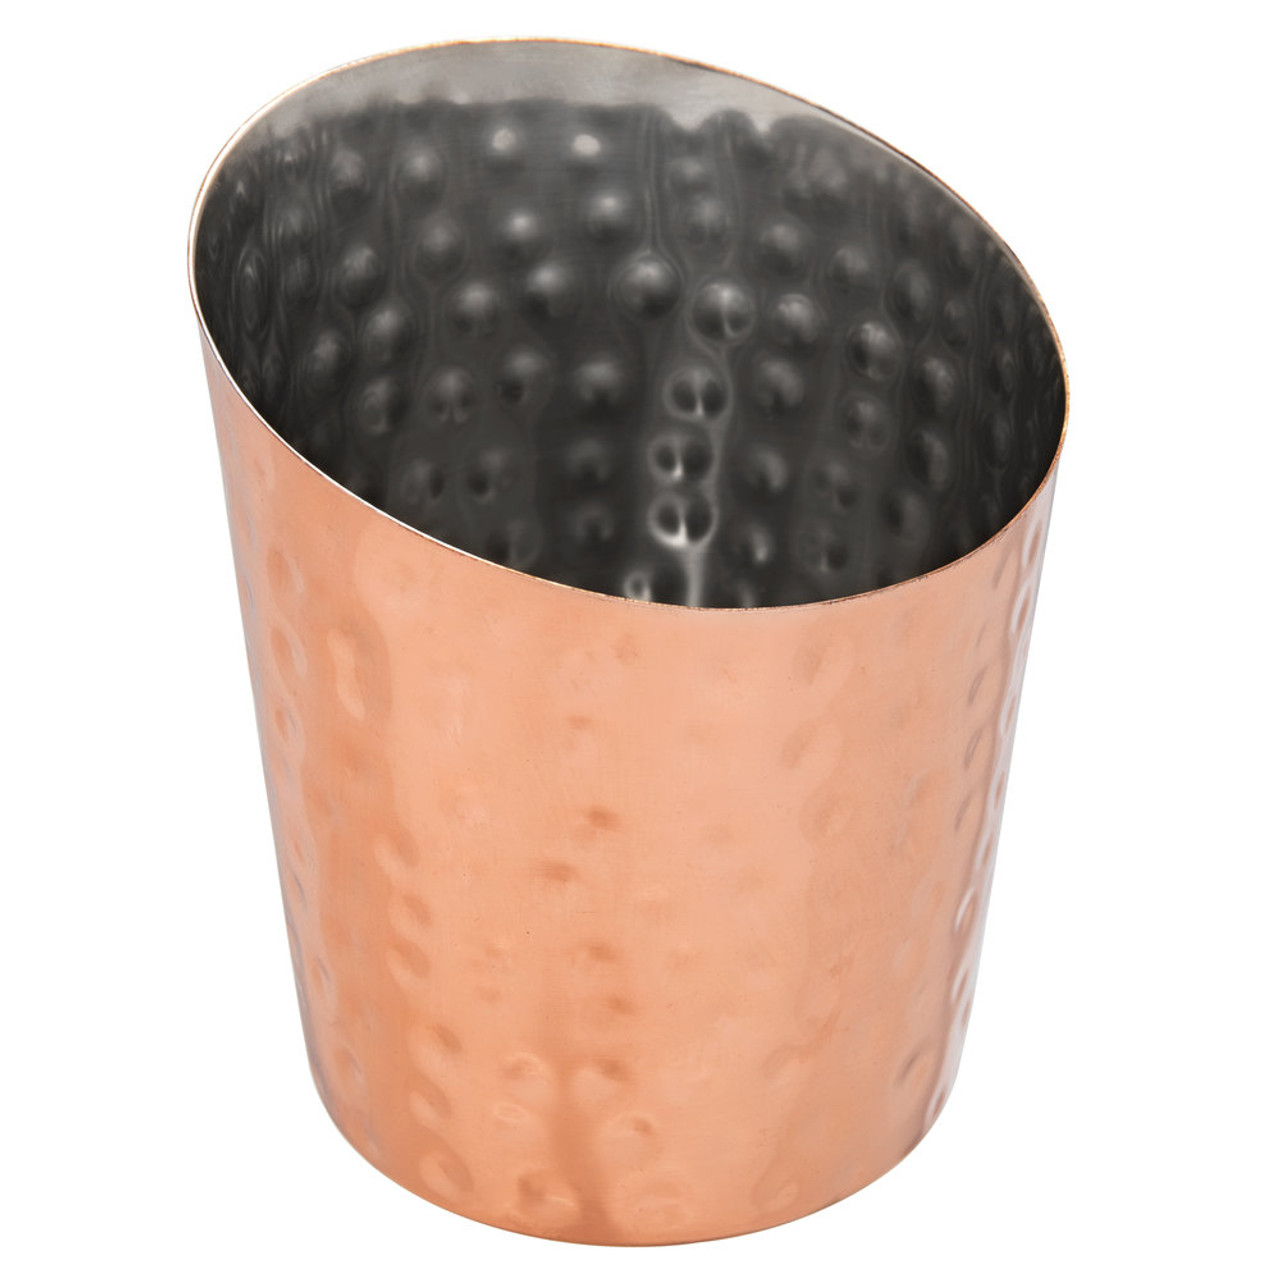 Hammered Copper Stainless Steel Appetizer / French Fry Holder with Angled Top-12 oz. 